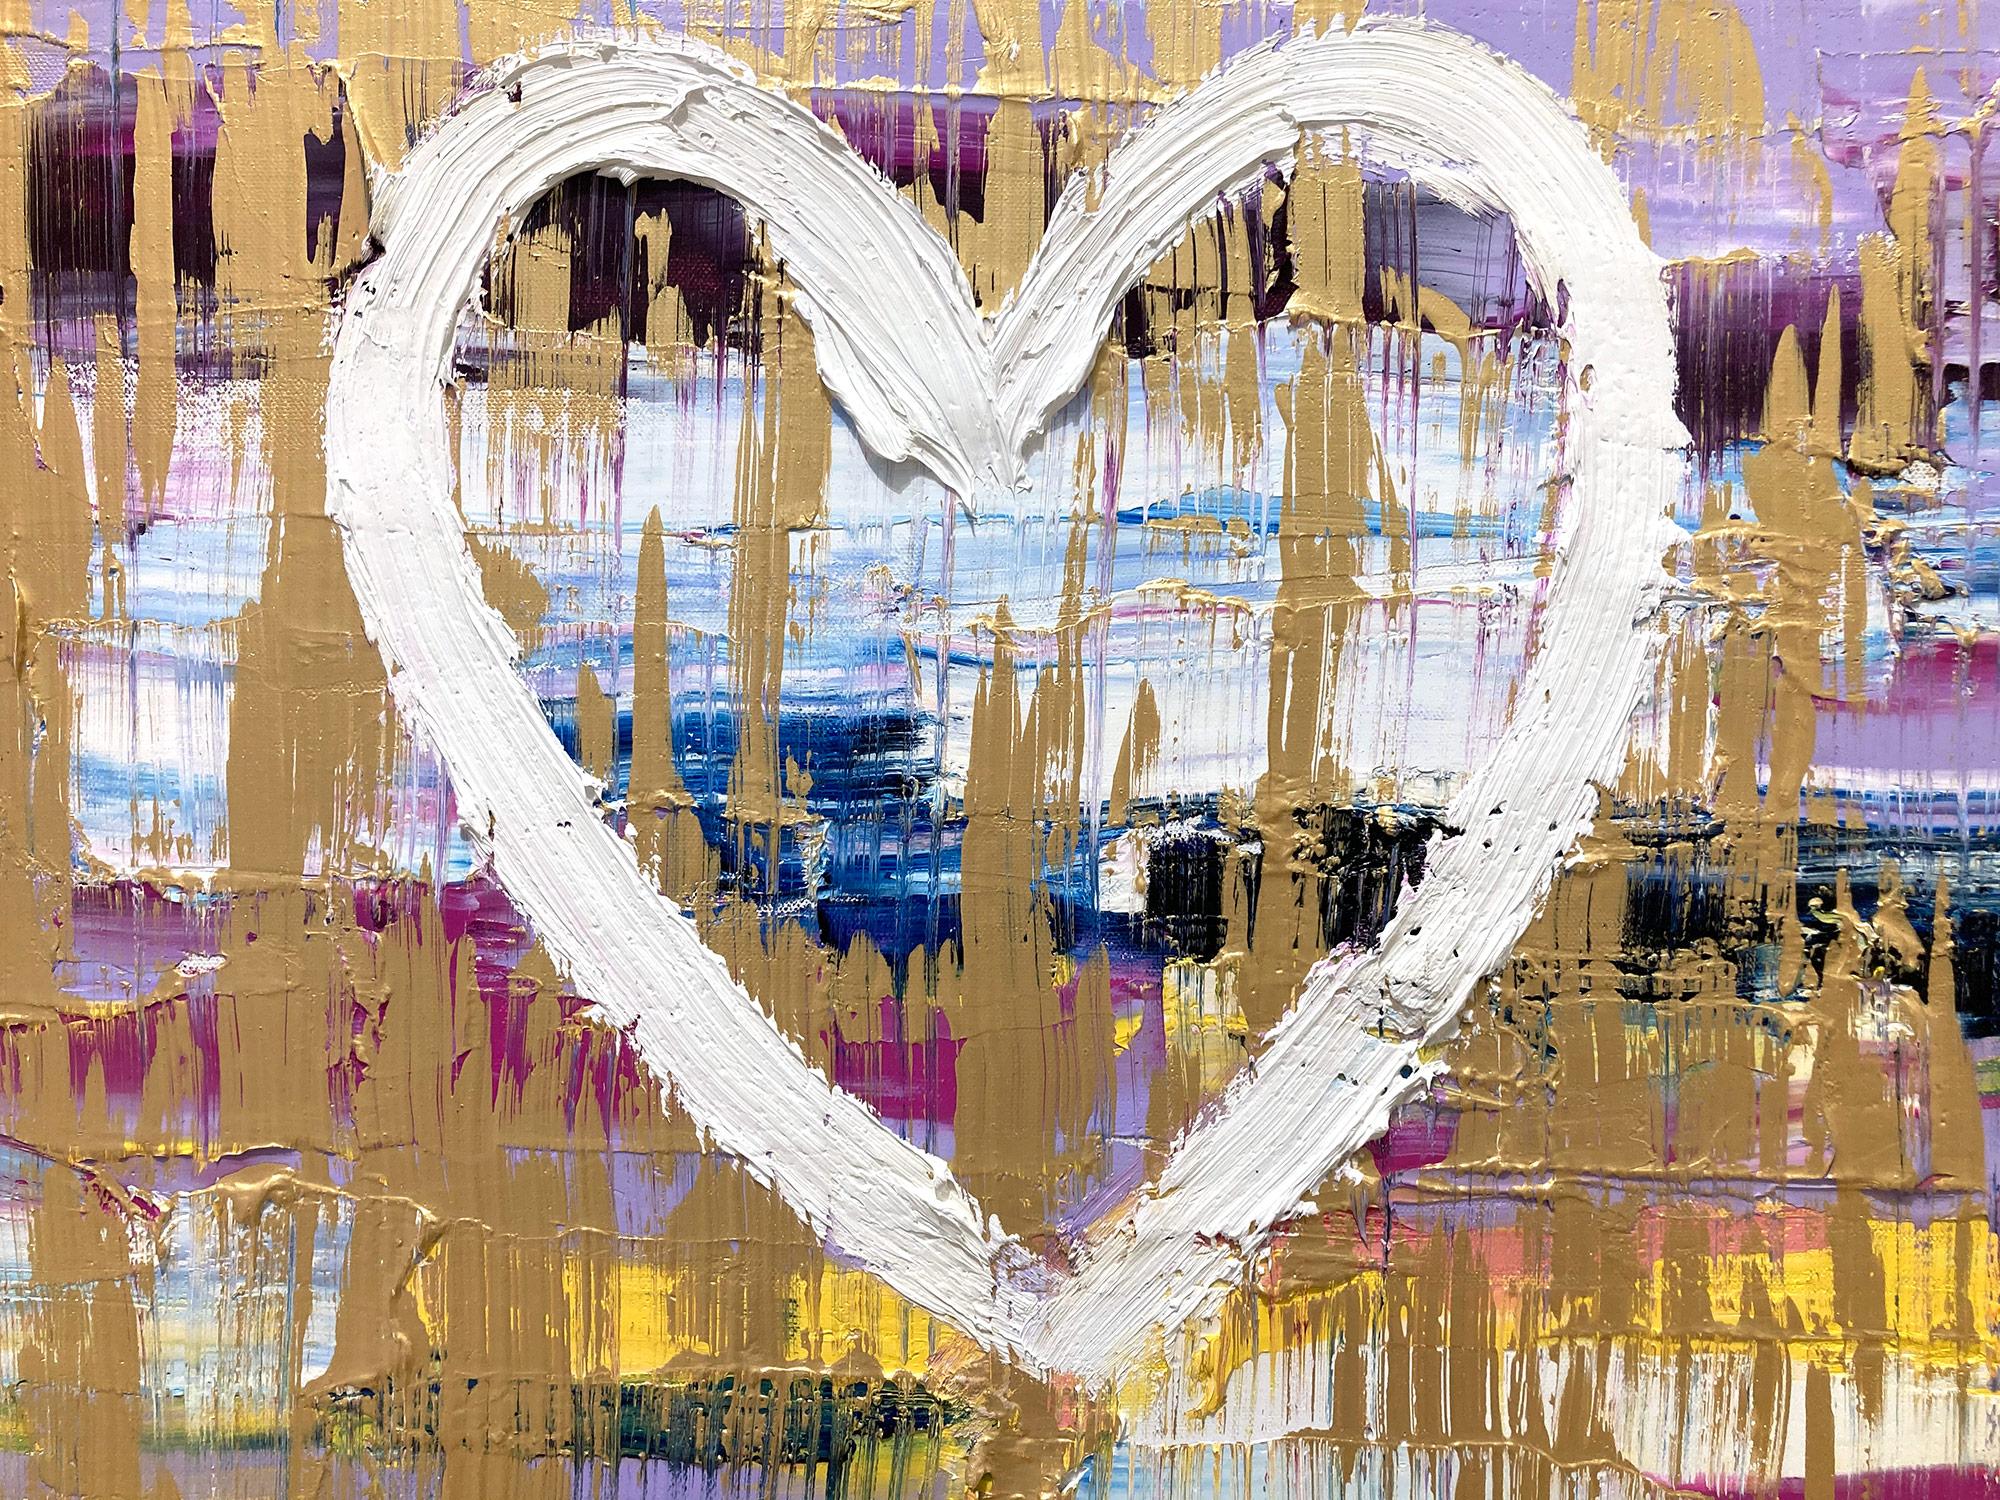 Motivated by bold color and fast brushwork, we are moved by the simplicity and thick textured oil paints in these works. This piece displays a beautiful lavender color with white heart. Shaoul’s “My Heart Collection” is a vibrant and energetic